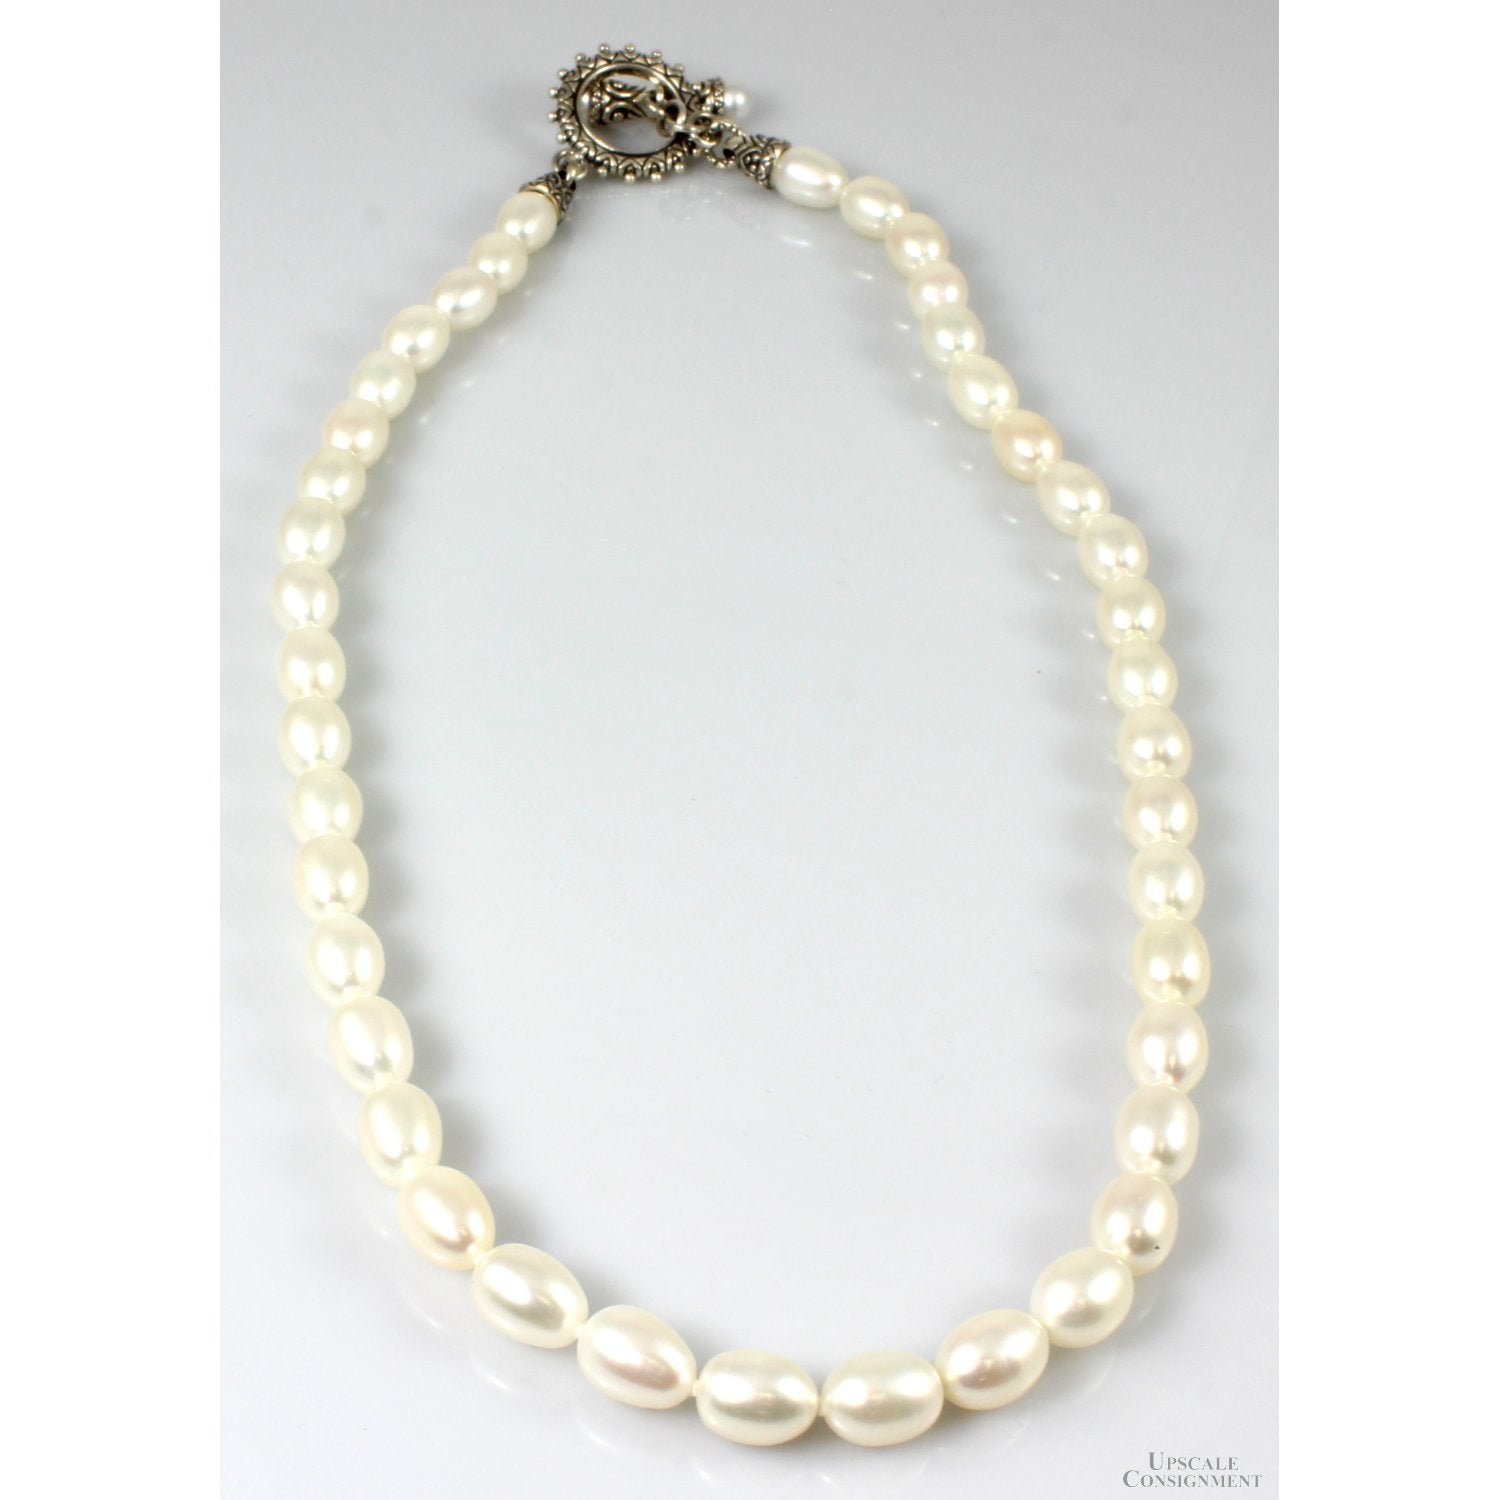 Vintage Richelieu Double Strand Pearl Necklace with Rhinestone Clasp | eBay